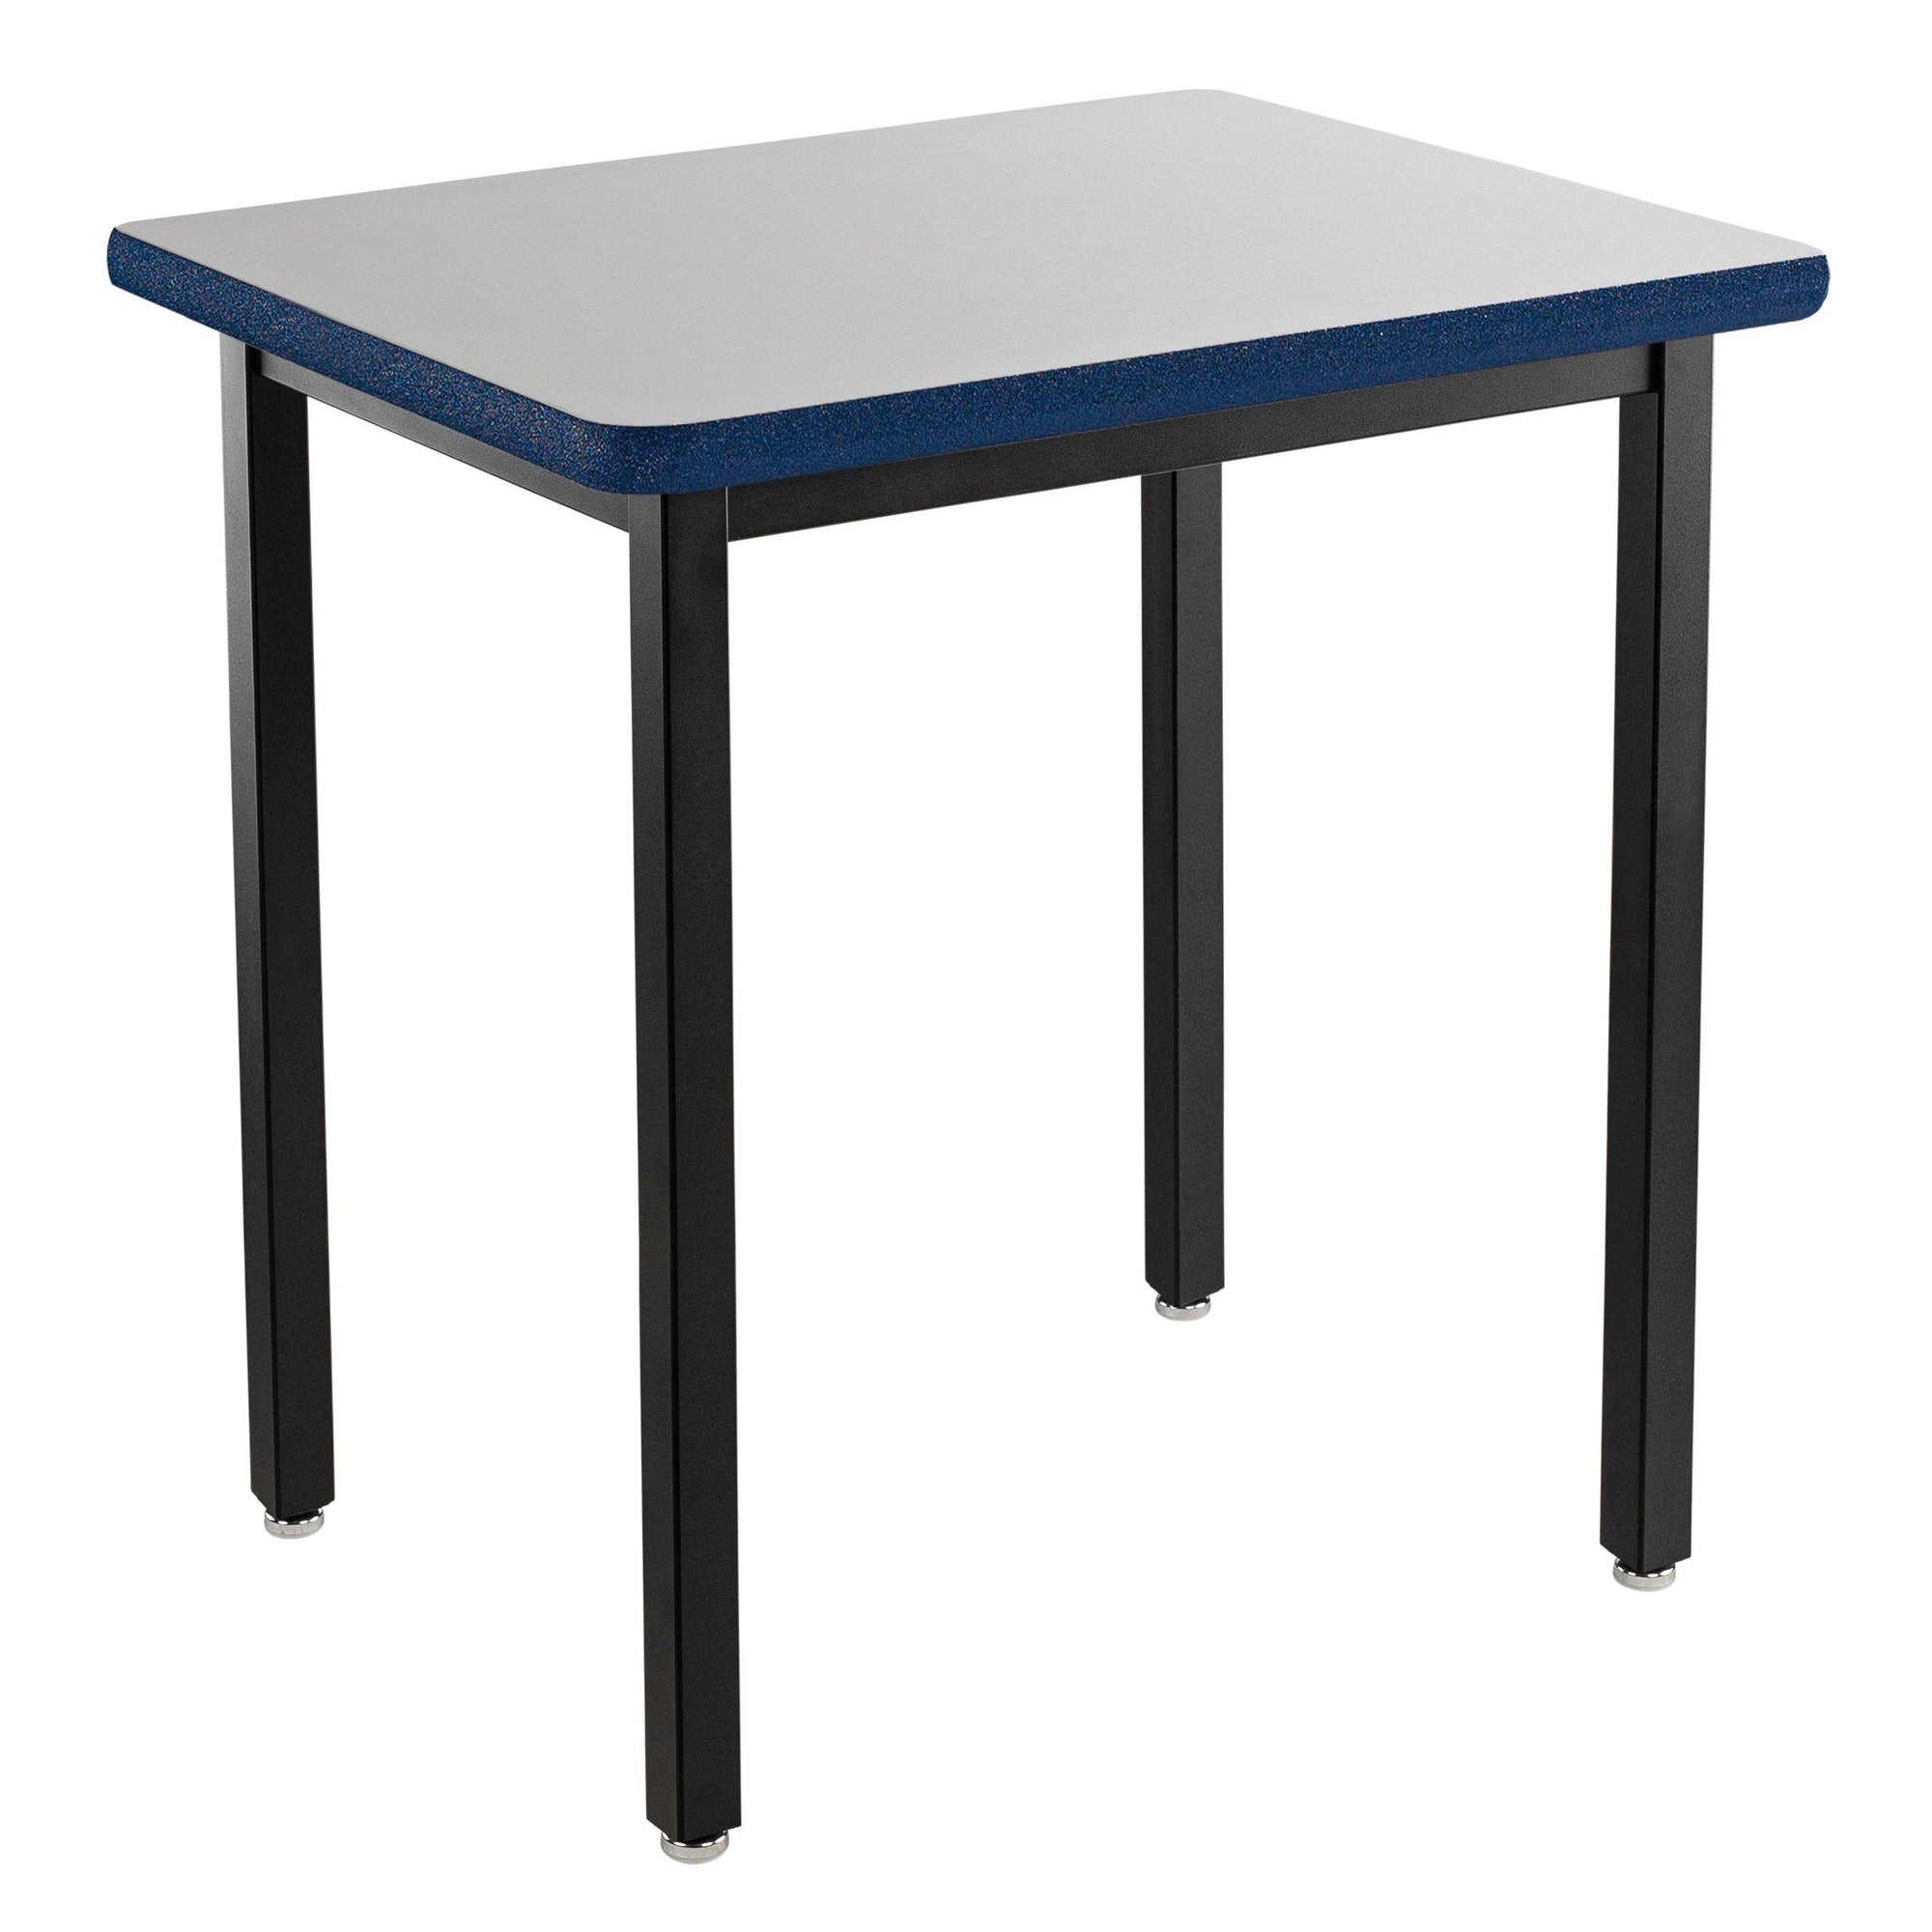 Heavy-Duty Fixed Height Utility Table, Black Frame, 24" x 24", Supreme High-Pressure Laminate Top with Black ProtectEdge